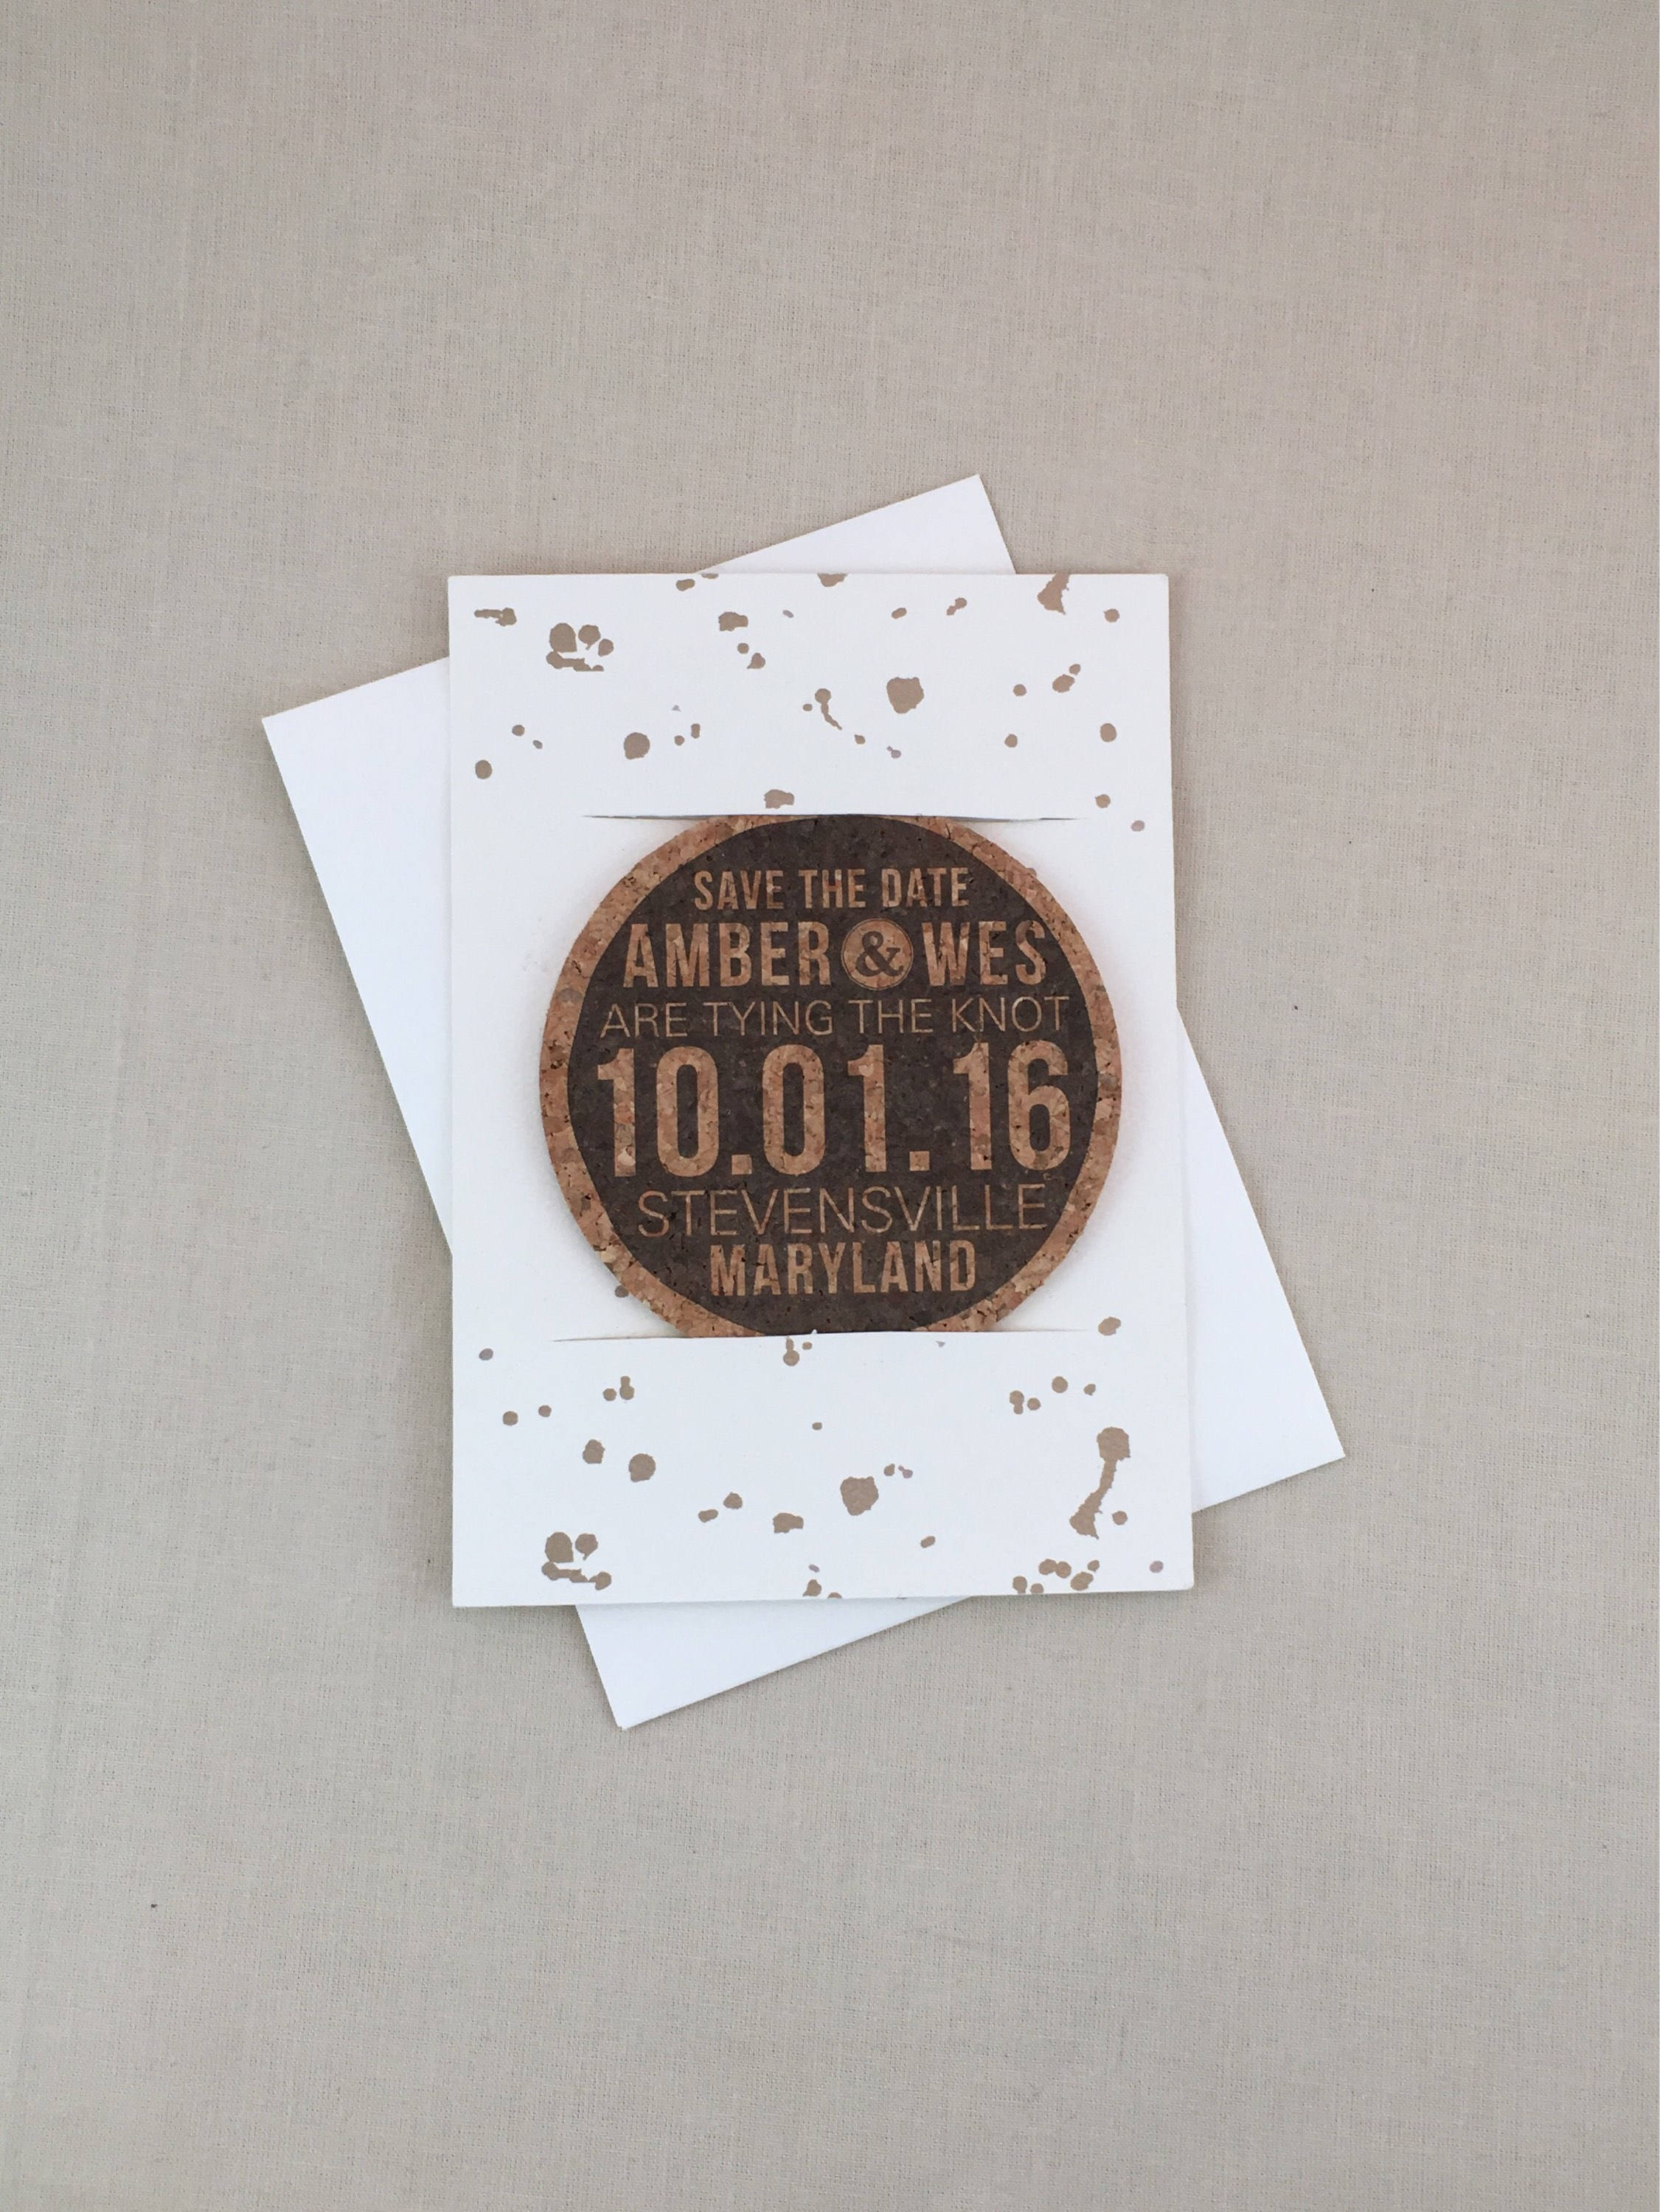 Tying the Knot Beige Spatter Design Cork Coaster Saves the Date with A7 Envelopes